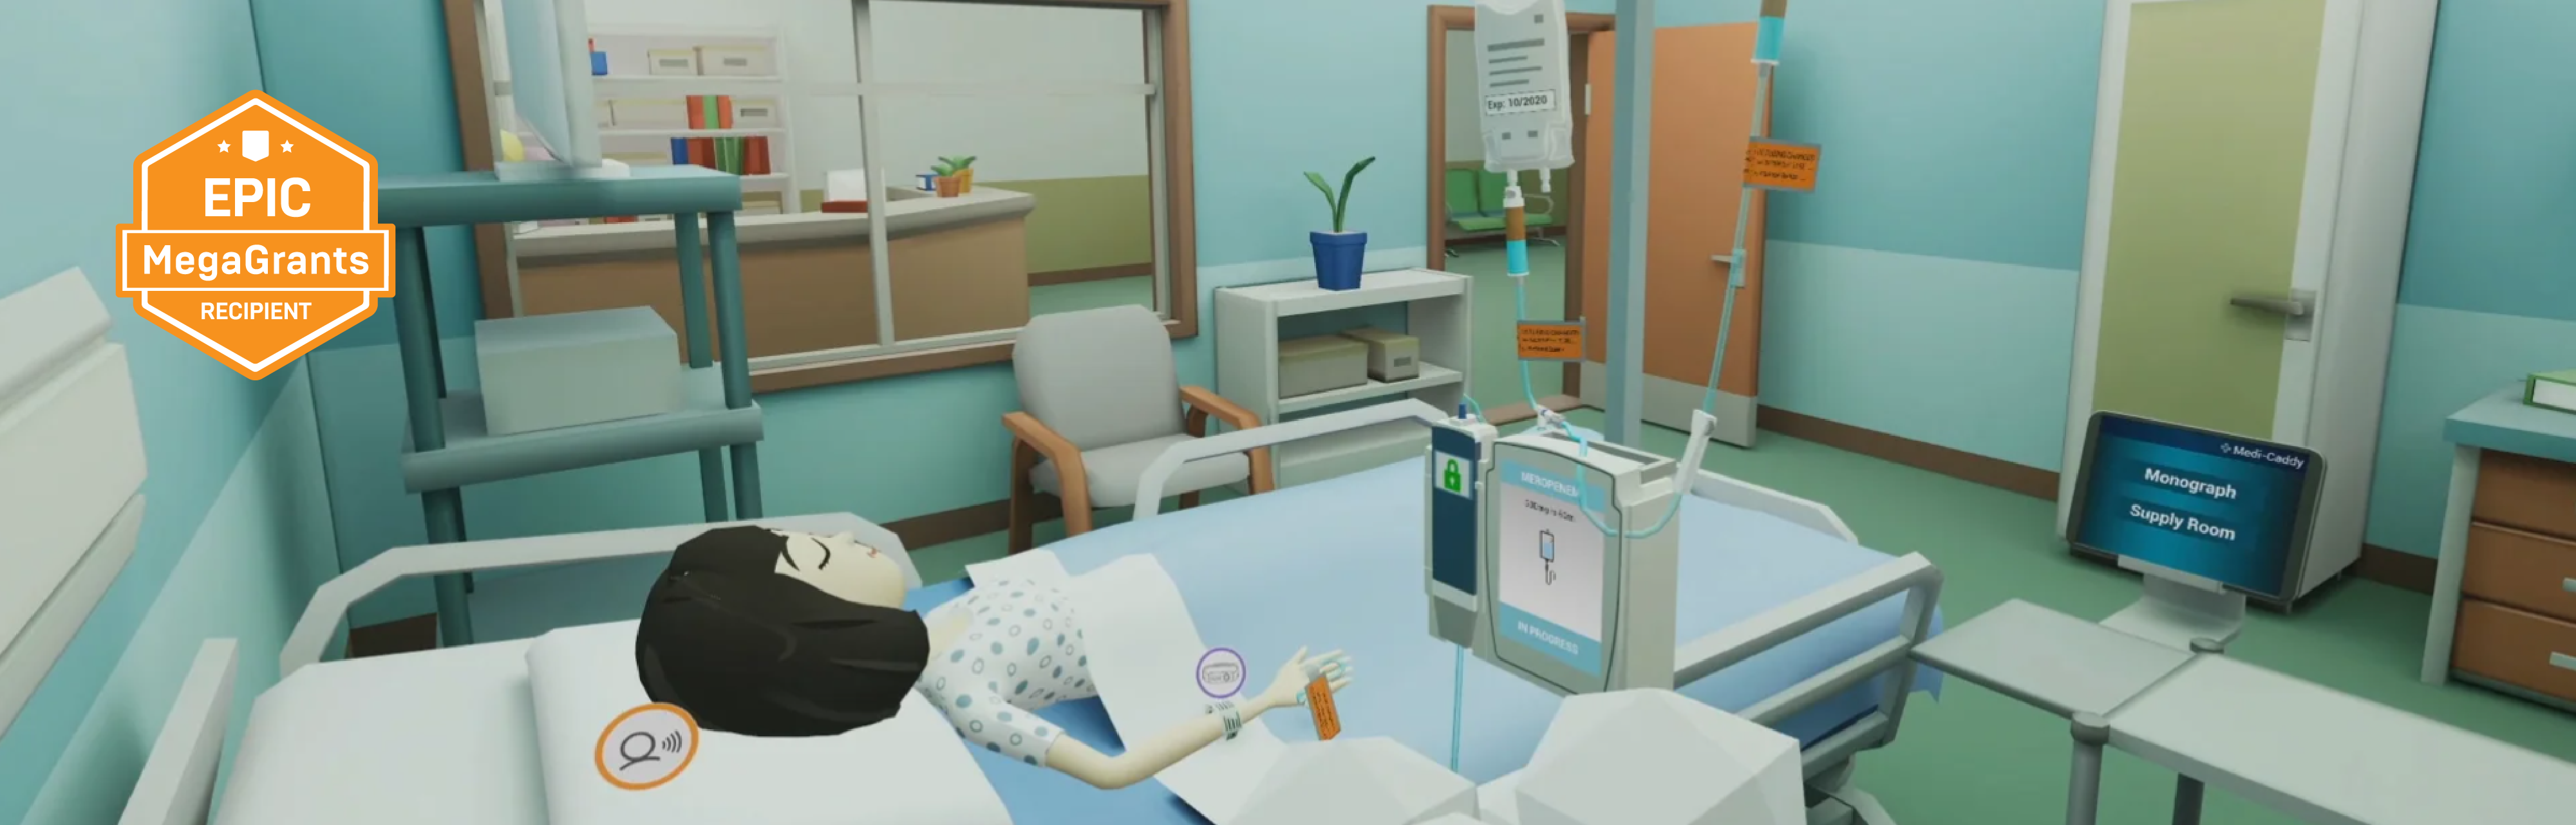 A virtual reality experience developed for training learners in a nursing environment